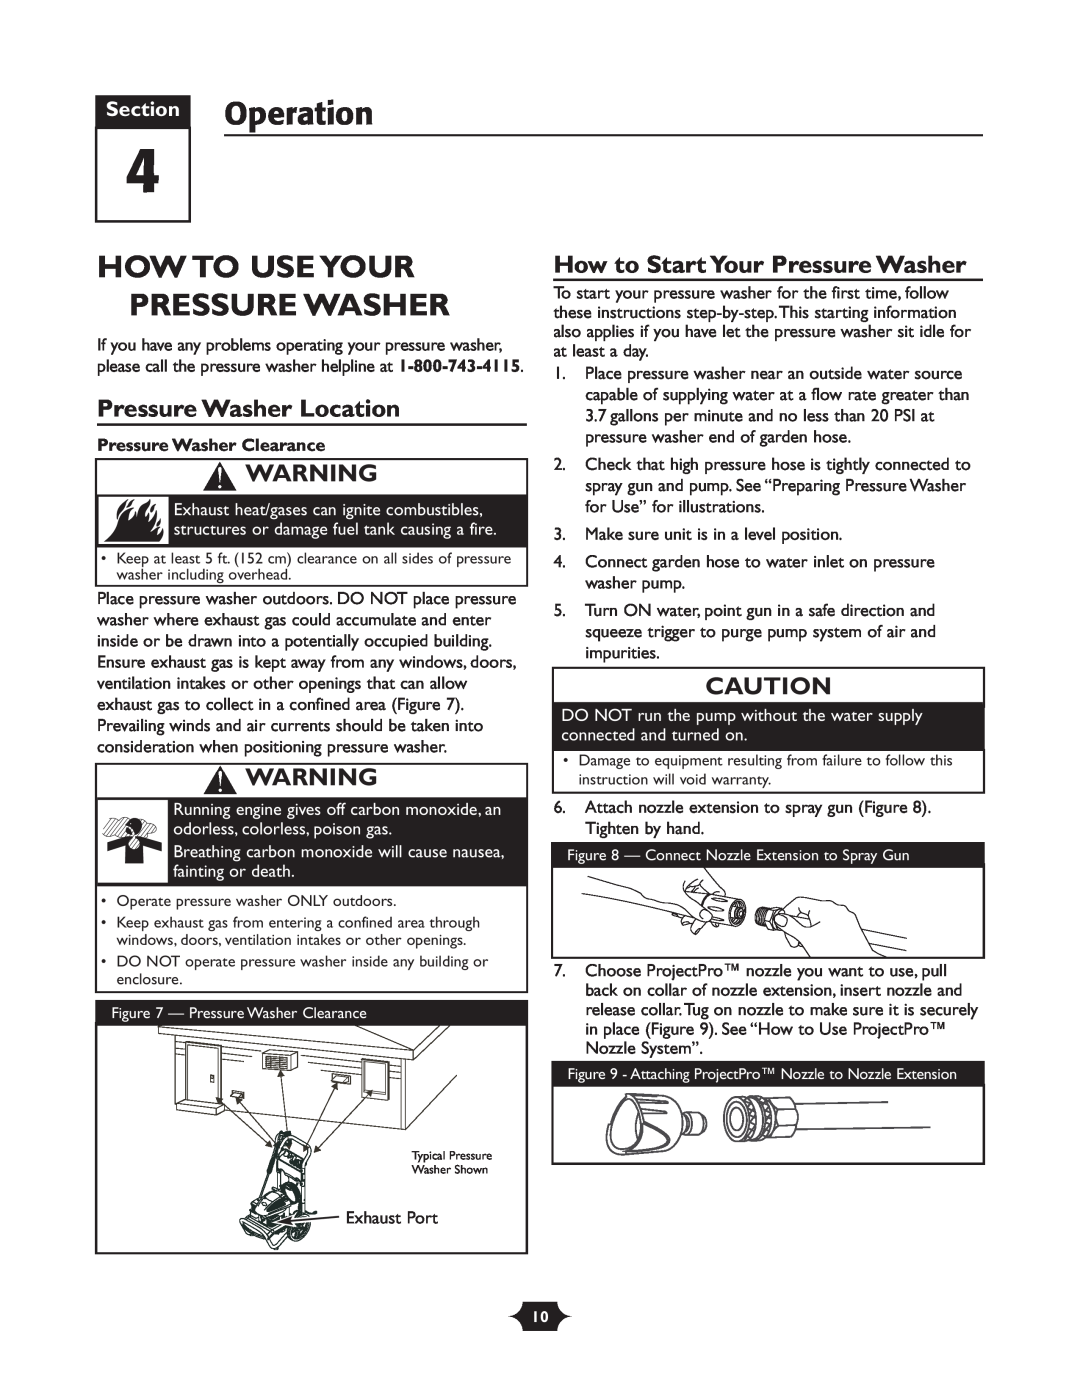 Briggs & Stratton 20270 operating instructions Section Operation, How To Use Your Pressure Washer, Pressure Washer Location 